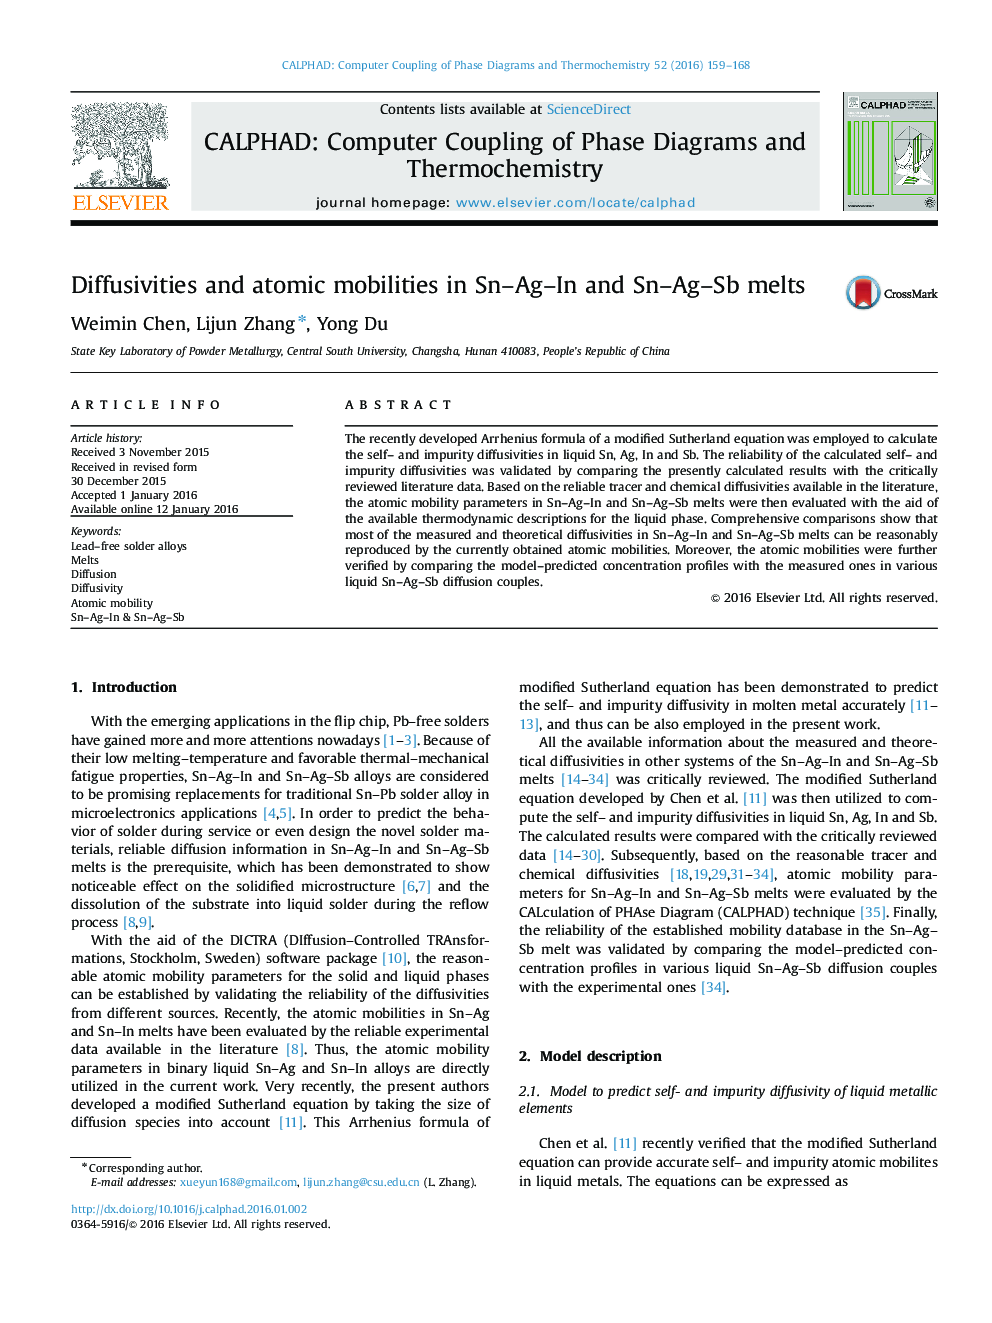 Diffusivities and atomic mobilities in Sn-Ag-In and Sn-Ag-Sb melts